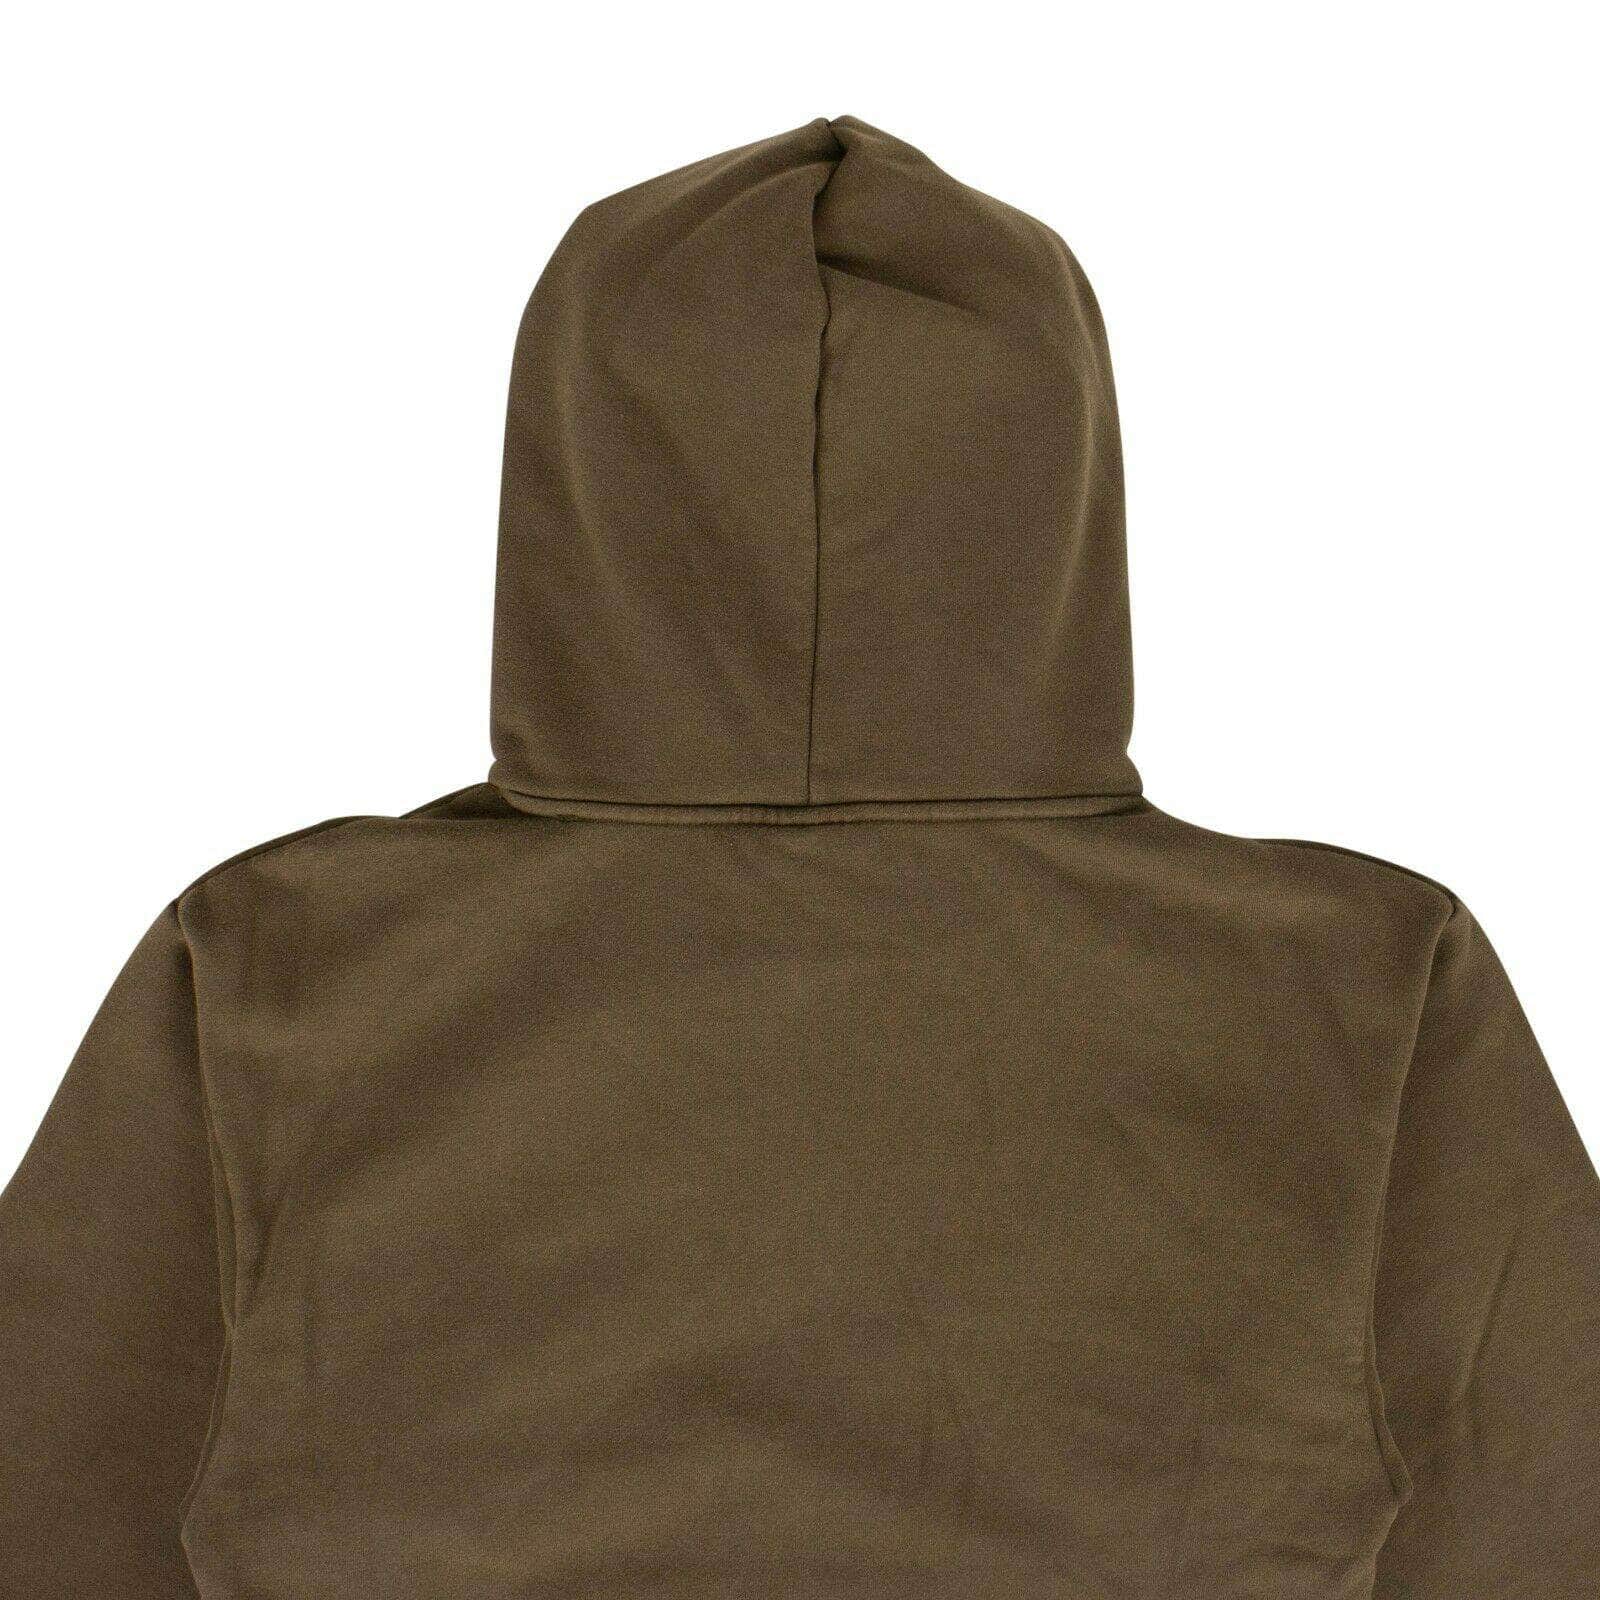 PLEASURES channelenable-all, chicmi, couponcollection, gender-mens, main-clothing, mens-shoes, pleasures, size-s, under-250 S Olive Green Cotton 'Burnout Dyed' Hooded Sweatshirt 80ST-PL-1045/S 80ST-PL-1045/S